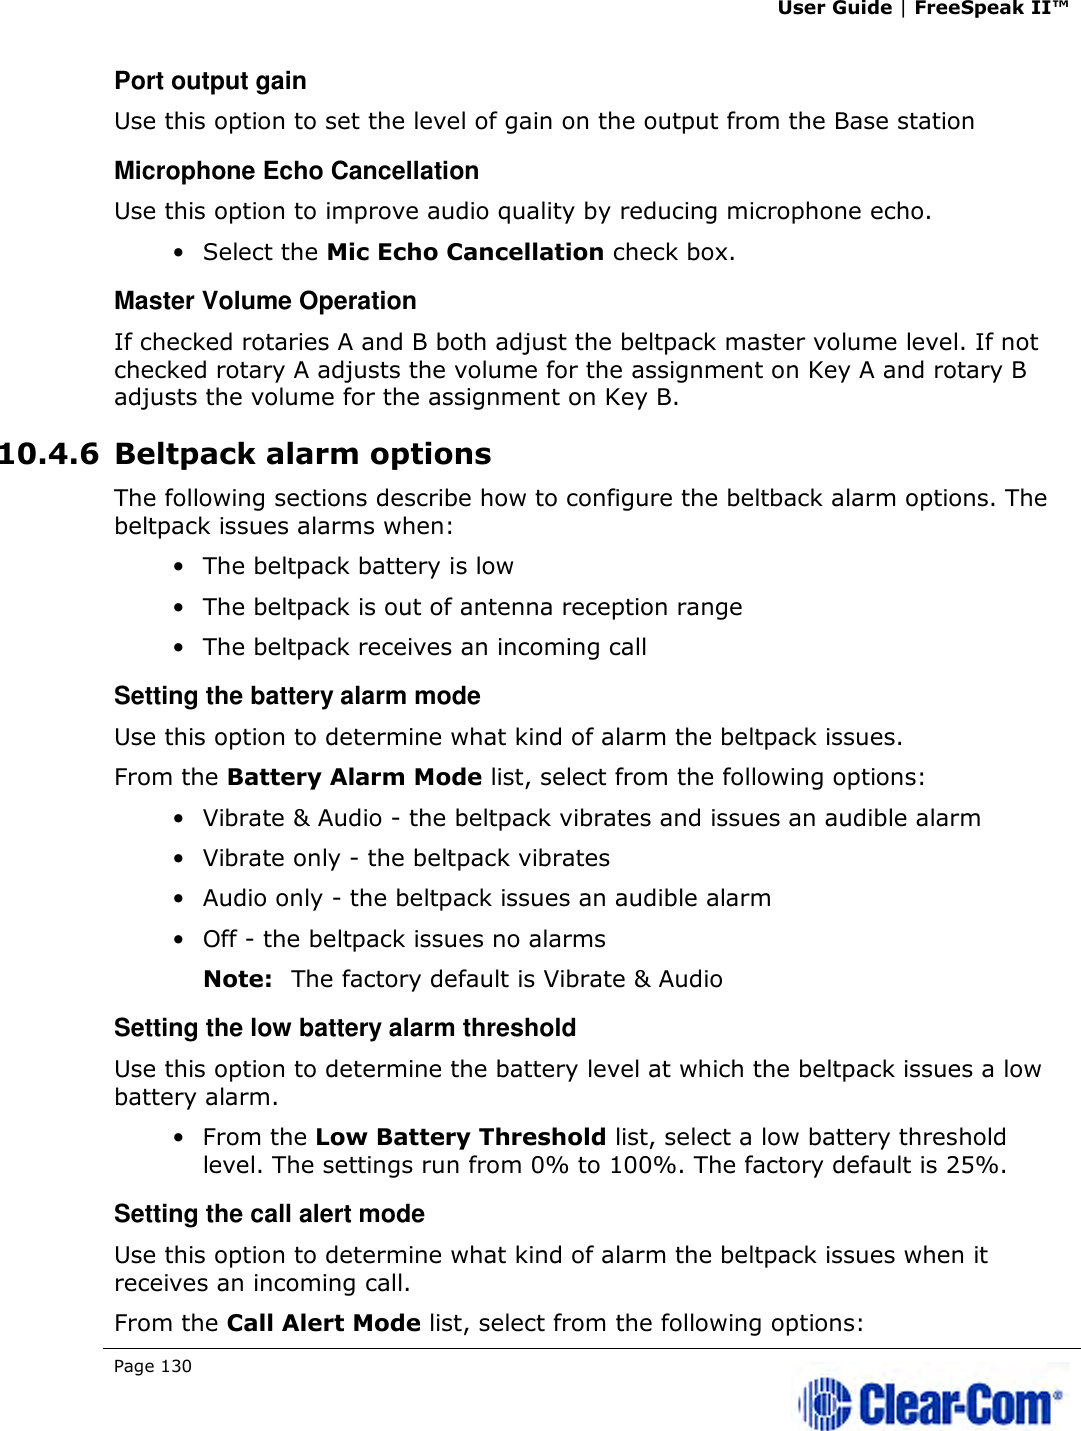 User Guide | FreeSpeak II™  Page 130   Port output gain Use this option to set the level of gain on the output from the Base station Microphone Echo Cancellation Use this option to improve audio quality by reducing microphone echo. • Select the Mic Echo Cancellation check box. Master Volume Operation If checked rotaries A and B both adjust the beltpack master volume level. If not checked rotary A adjusts the volume for the assignment on Key A and rotary B adjusts the volume for the assignment on Key B. 10.4.6 Beltpack alarm options The following sections describe how to configure the beltback alarm options. The beltpack issues alarms when: • The beltpack battery is low • The beltpack is out of antenna reception range • The beltpack receives an incoming call Setting the battery alarm mode Use this option to determine what kind of alarm the beltpack issues. From the Battery Alarm Mode list, select from the following options: • Vibrate &amp; Audio - the beltpack vibrates and issues an audible alarm • Vibrate only - the beltpack vibrates • Audio only - the beltpack issues an audible alarm • Off - the beltpack issues no alarms Note: The factory default is Vibrate &amp; Audio Setting the low battery alarm threshold Use this option to determine the battery level at which the beltpack issues a low battery alarm. • From the Low Battery Threshold list, select a low battery threshold level. The settings run from 0% to 100%. The factory default is 25%. Setting the call alert mode Use this option to determine what kind of alarm the beltpack issues when it receives an incoming call. From the Call Alert Mode list, select from the following options: 